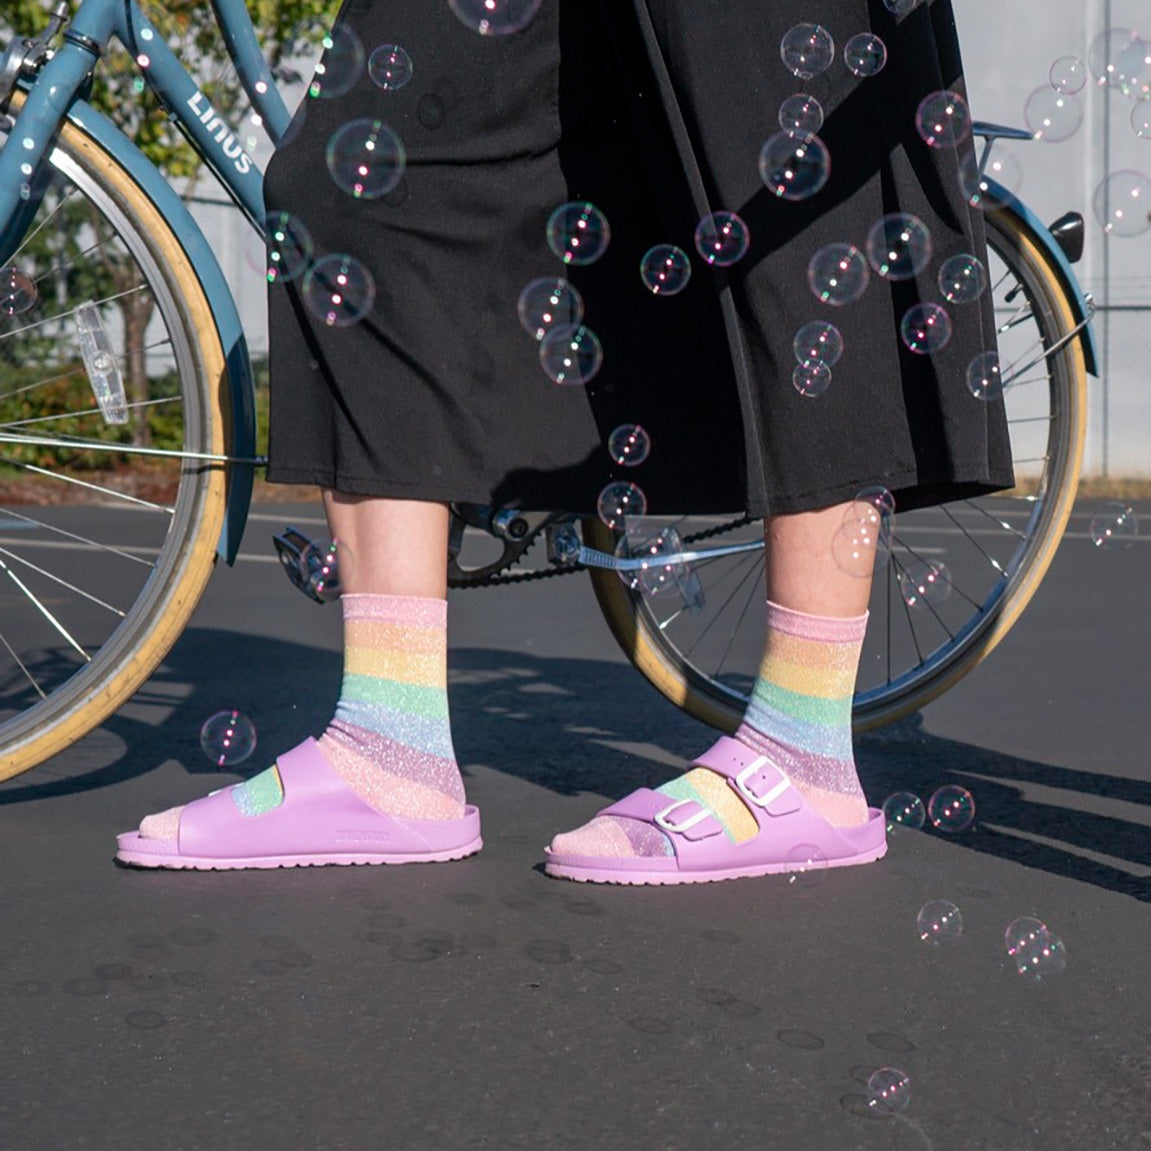 A person wears pastel rainbow crew socks with pale purple sandals and a black skirt while soap bubbles swirl around